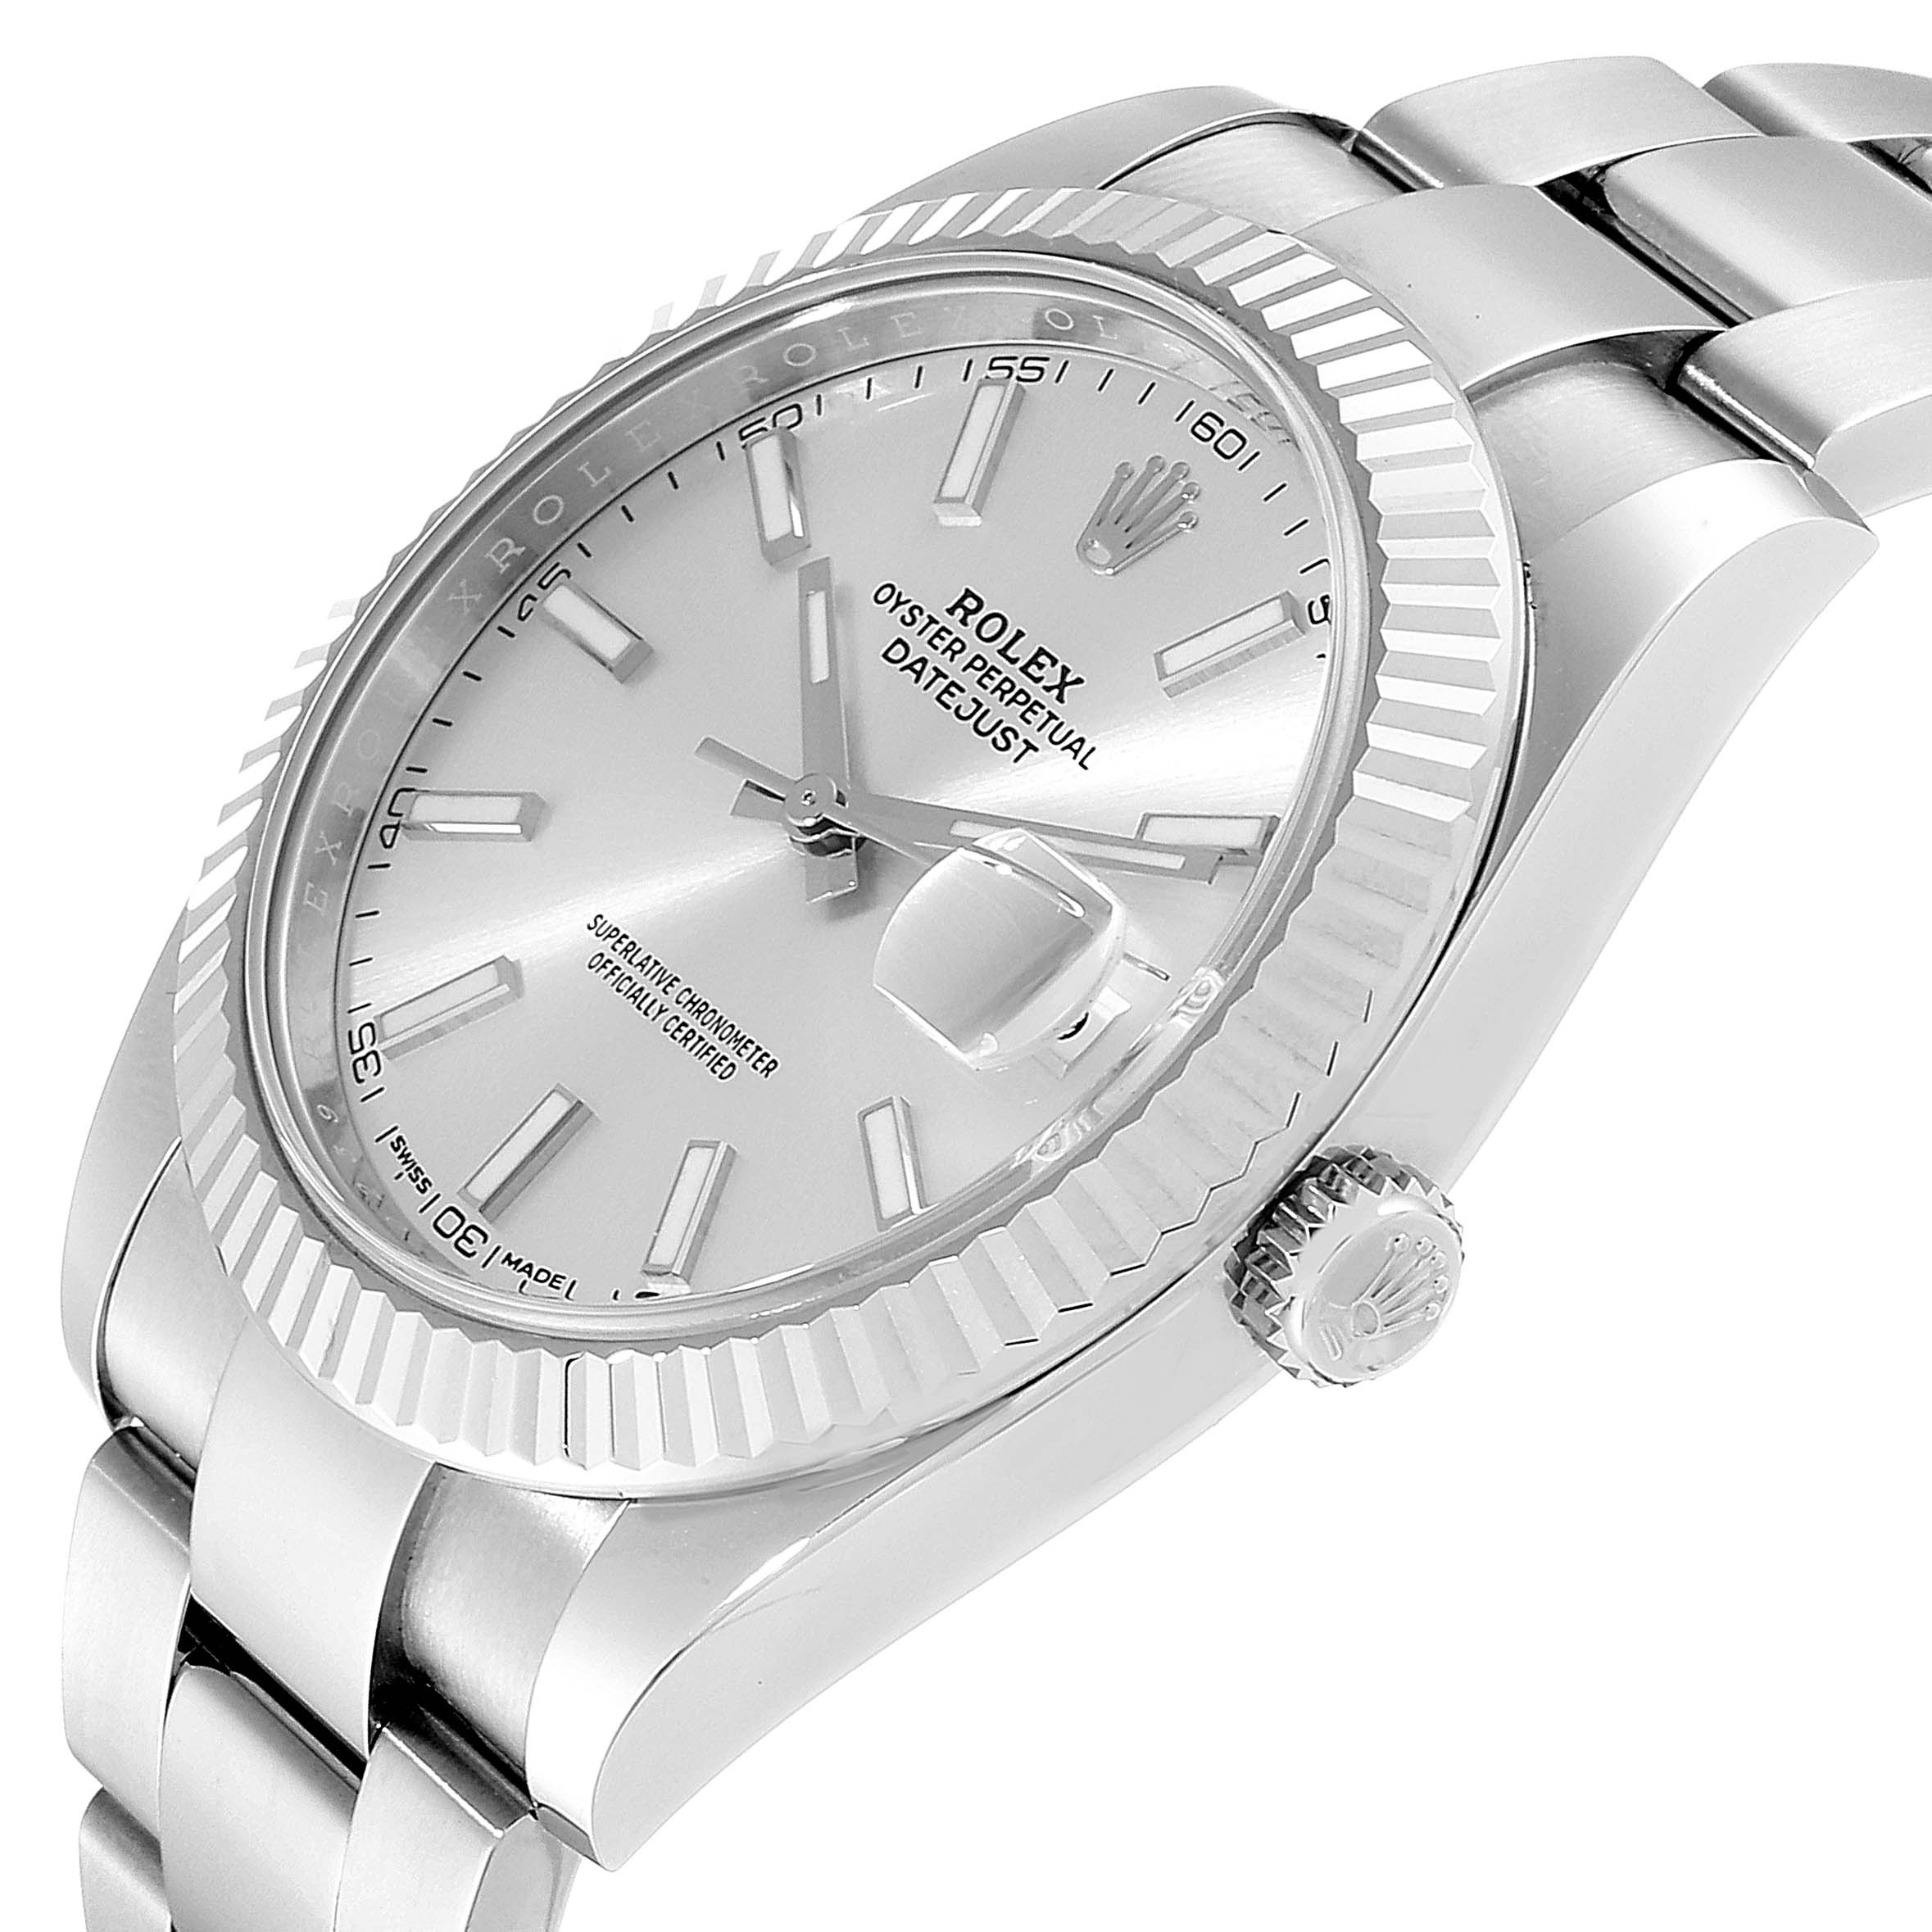 Rolex Datejust 41 Steel White Gold Silver Dial Mens Watch 126334 Box ...